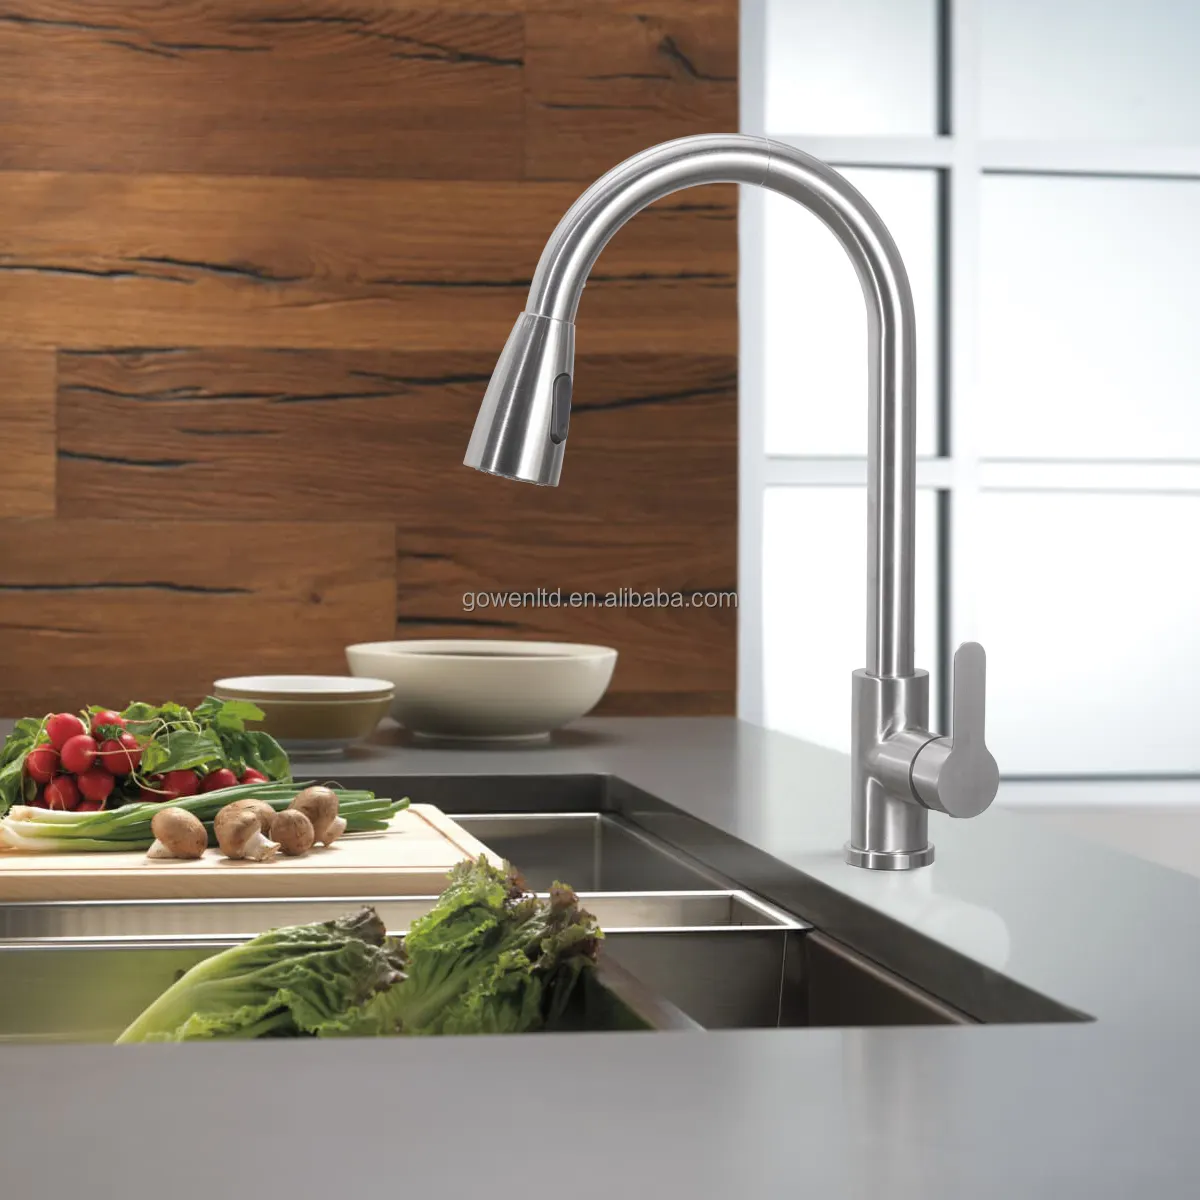 Tapwares Pull Down Stainless Steel Waterfall Spout Brushed Nickel Kitchen Faucet Kitchen Sink